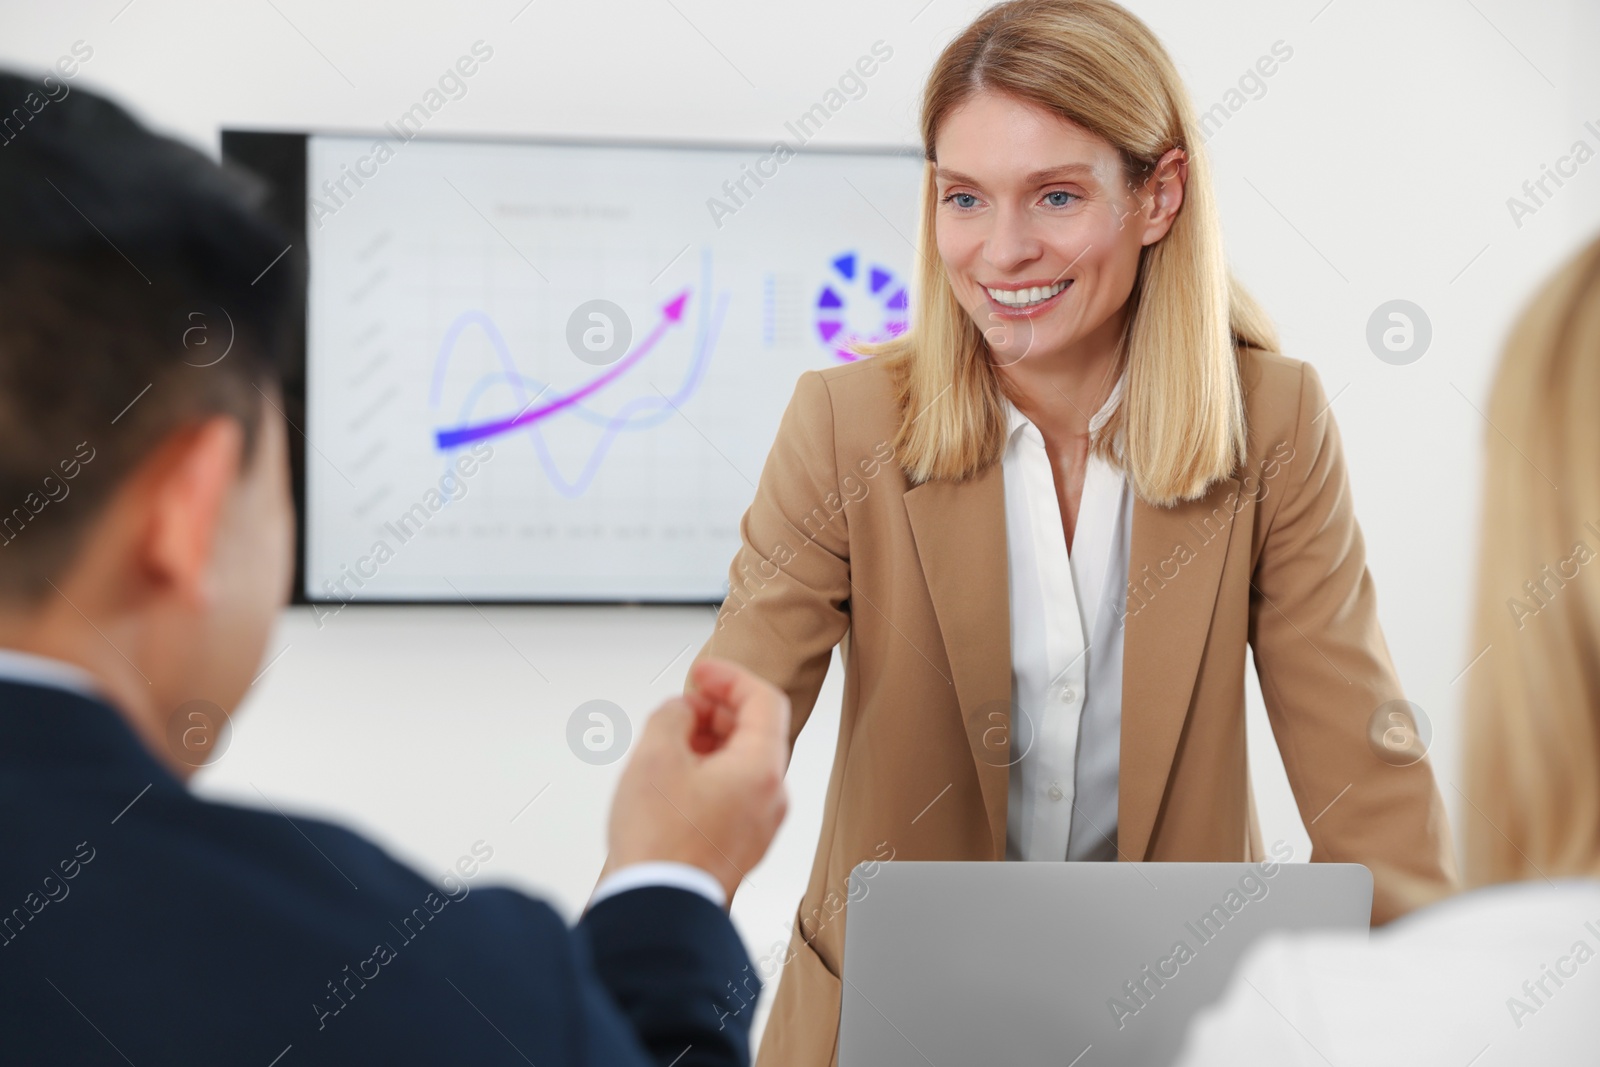 Photo of Businesswoman having meeting with her employees in office